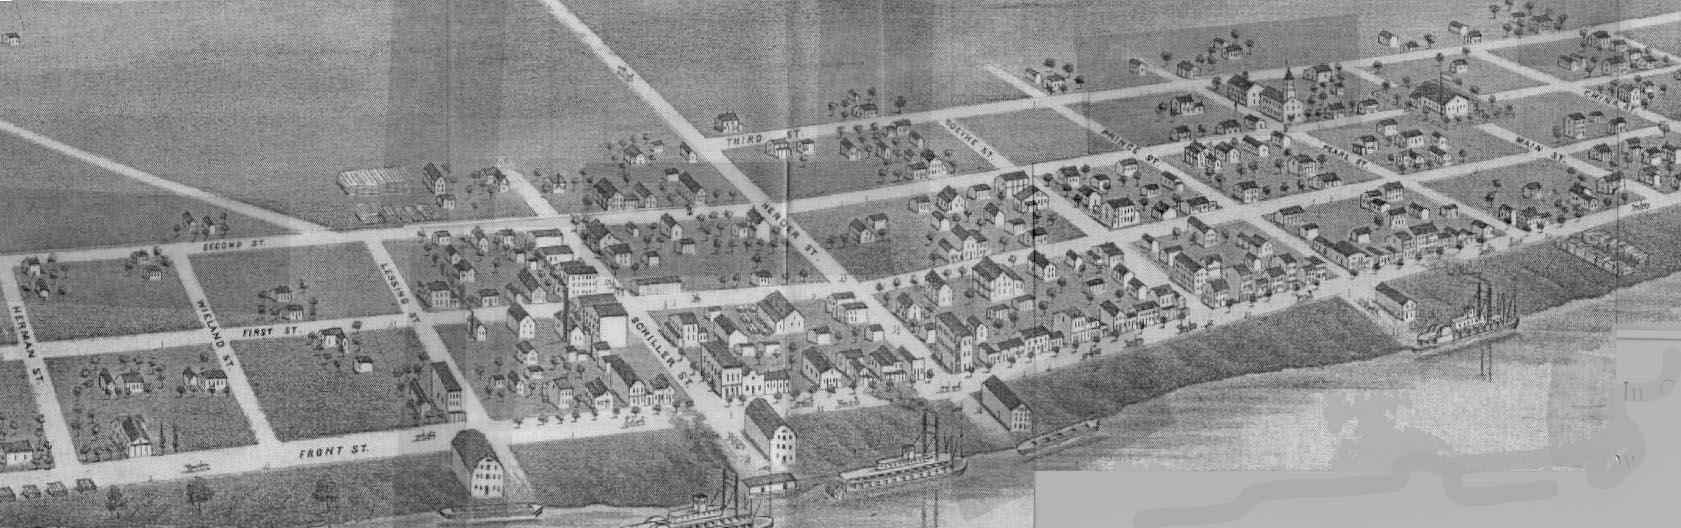 Historic drawing of the town layout of Gutenberg, IA